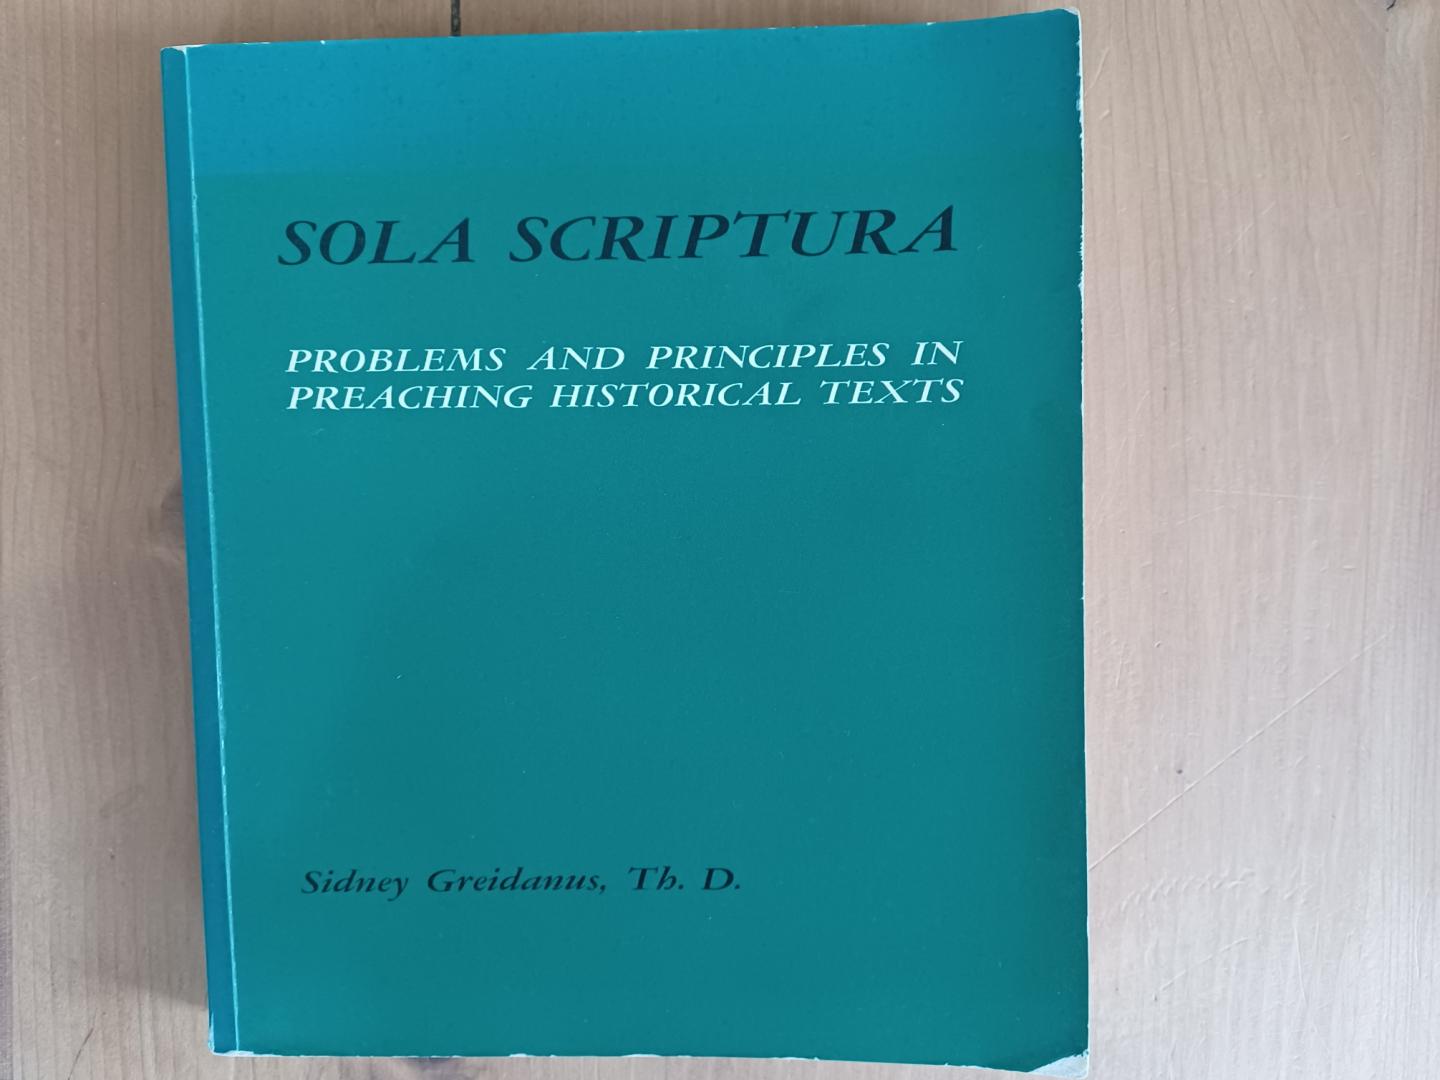 Greidanus, Sidney Th.D. - Sola Scriptura, Problems and Principles in Preaching Historical Texts